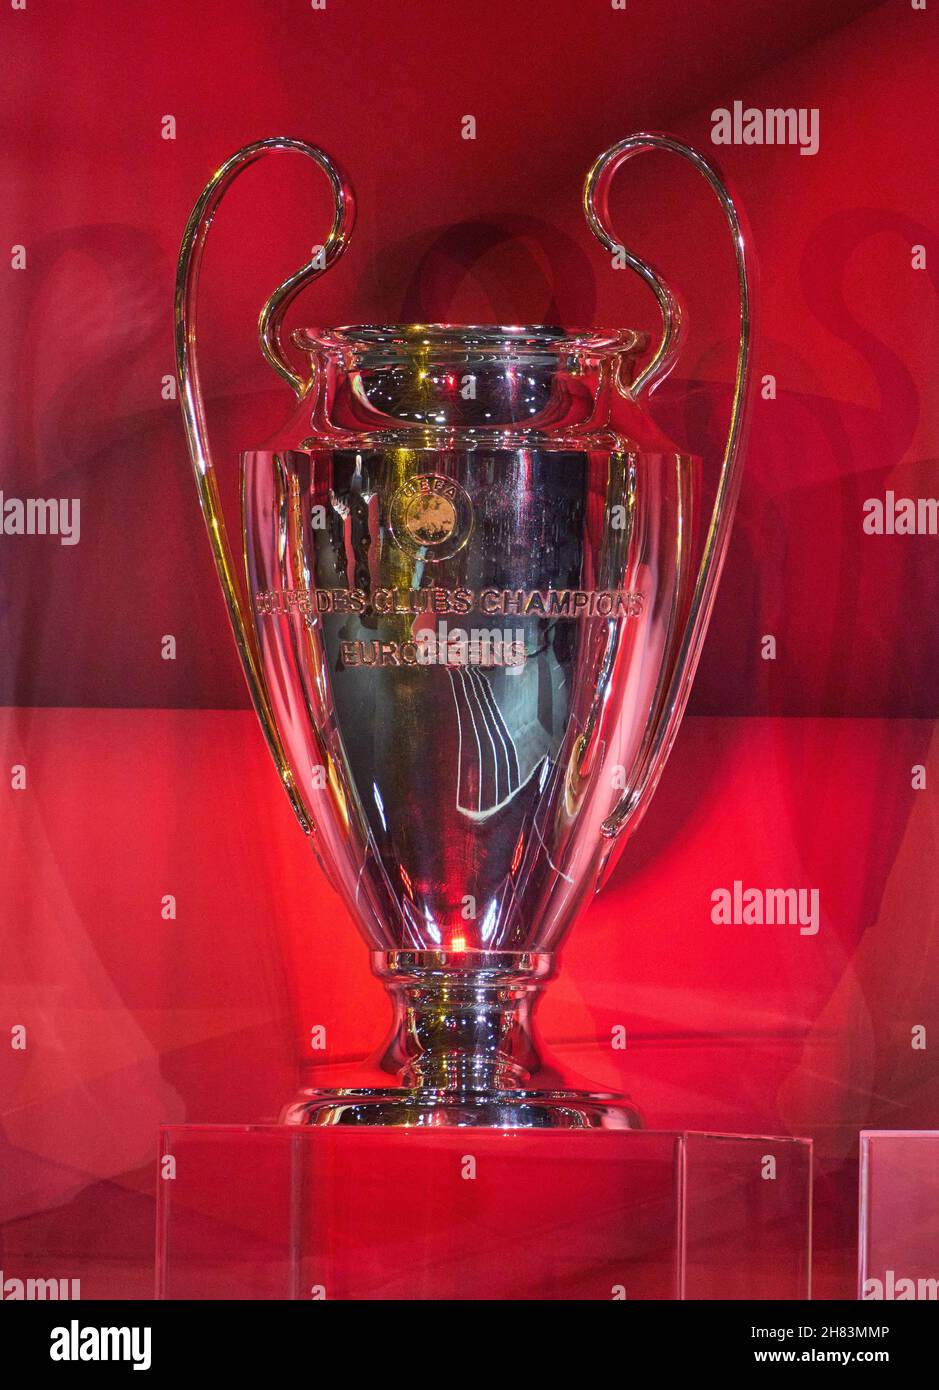 All important trophies: UEFA Champions League at the annual general Meeting of BAYERN MÜNCHEN in Dome Munich, November 25, 2021, Season 2021/2022, © Peter Schatz / Alamy Live News Stock Photo - Alamy